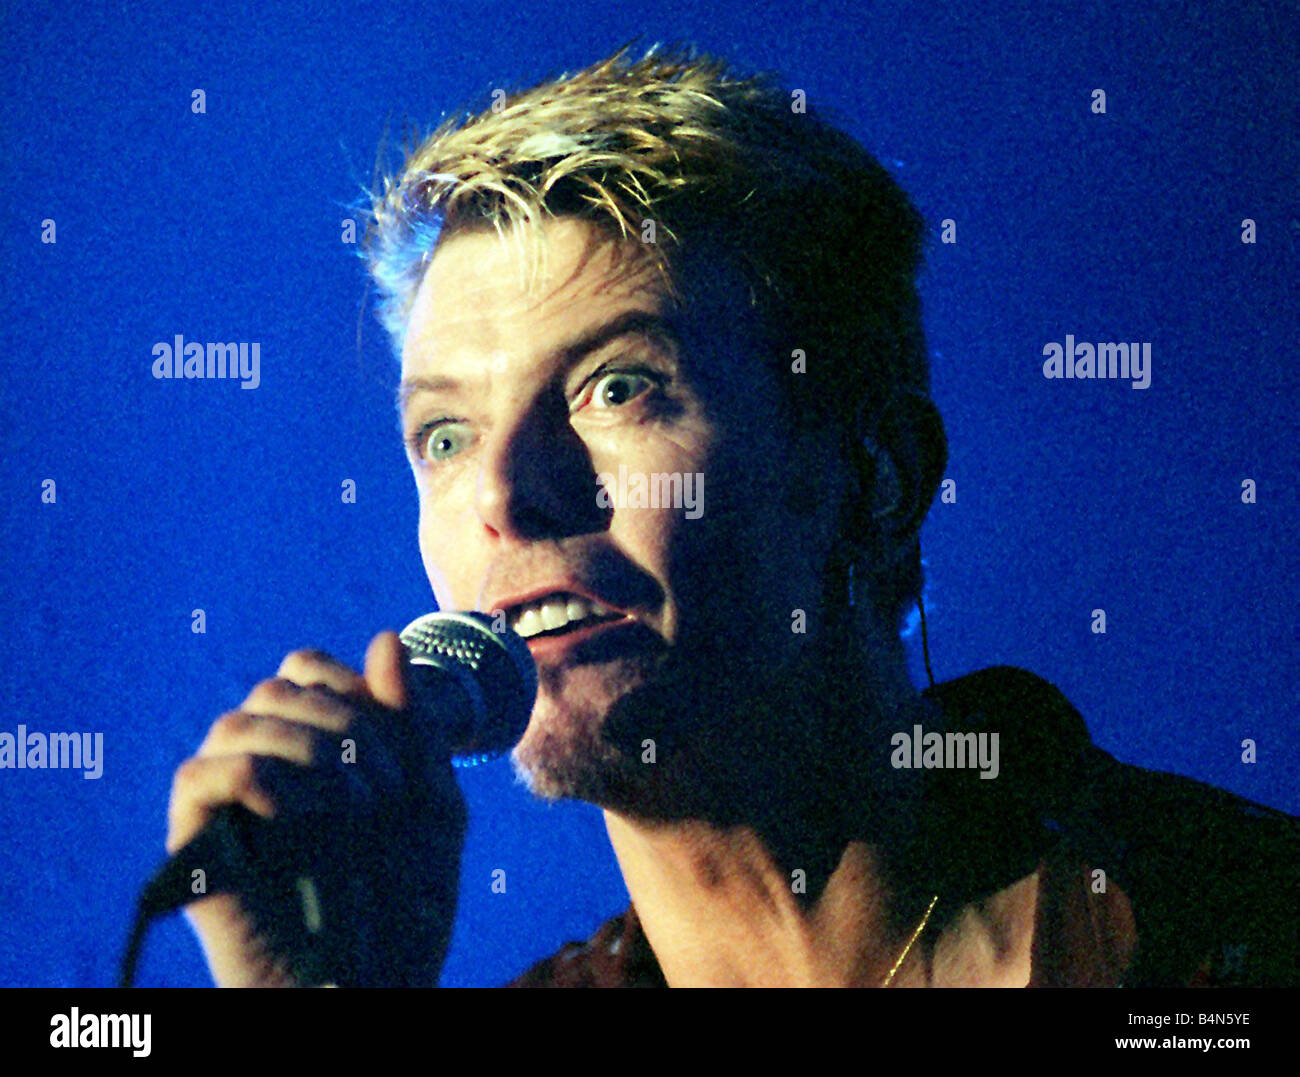 Singer David Bowie July 1997 singing live on stage at the Glasgow Barrowlands concert Stock Photo